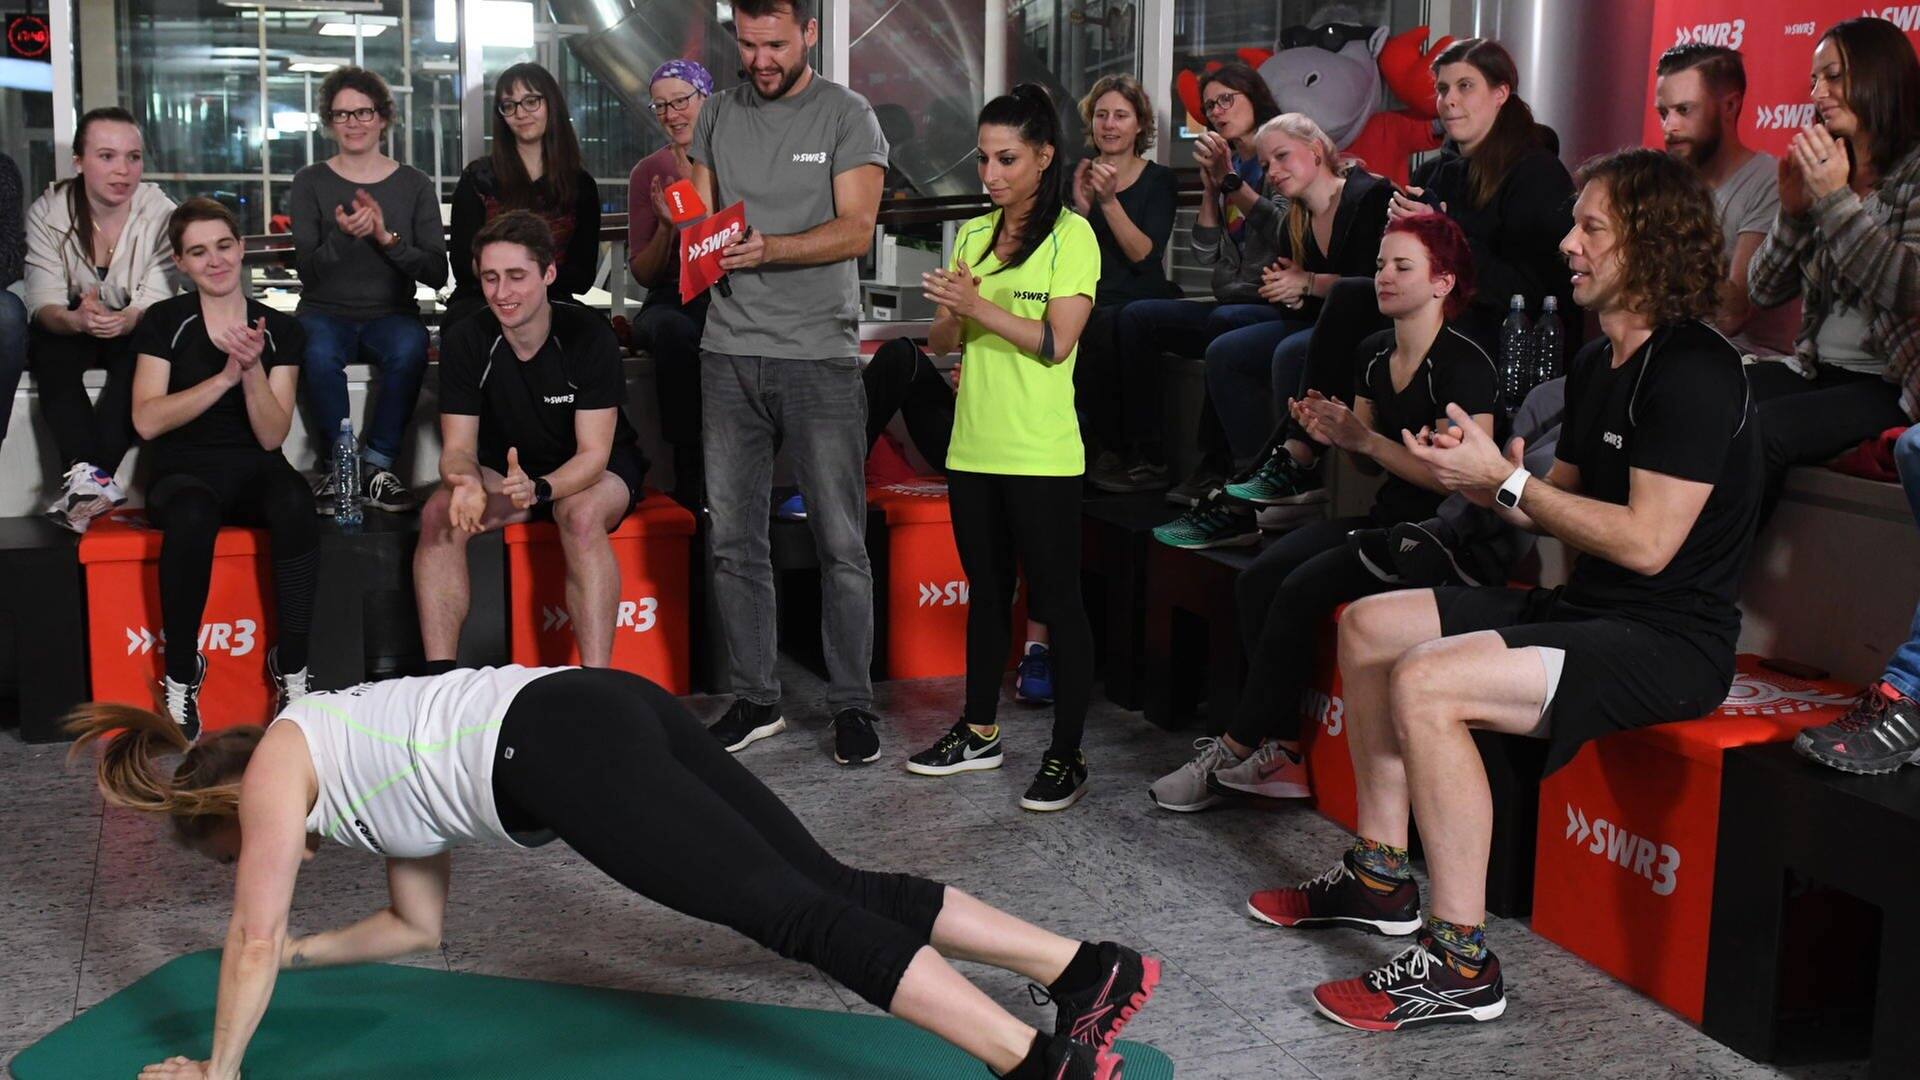 Fitness-Duell Highlights 2 (Foto: SWR3)